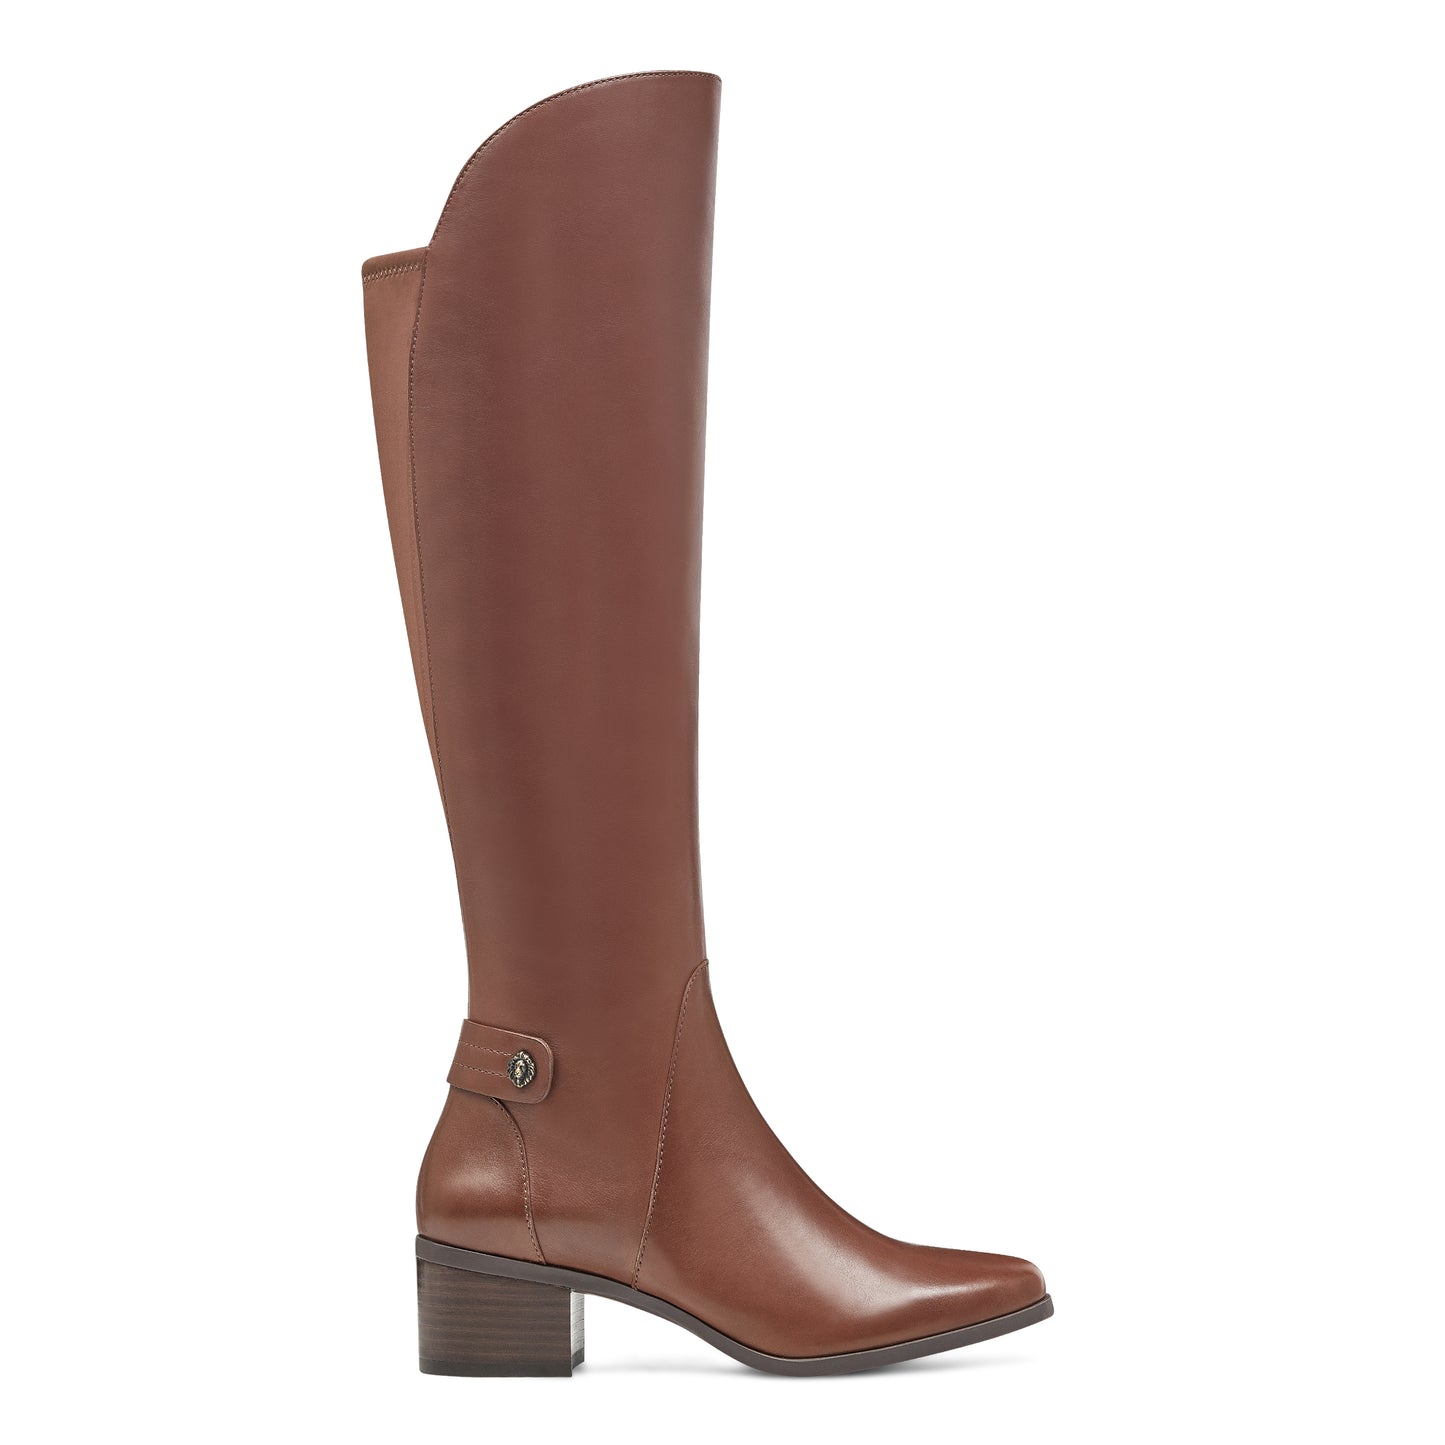 Embrace a modern silhouette that's sure to garner plenty of compliments with Anne Klein smooth leather Jela boot. Jela has a pull-on design with a half-zip closure at the side and a stretch panel at the back for added comfort. Jela's insole has dual, lightweight foam layers to provide cushioning and shock-absorption as well as a durable rubber outsole